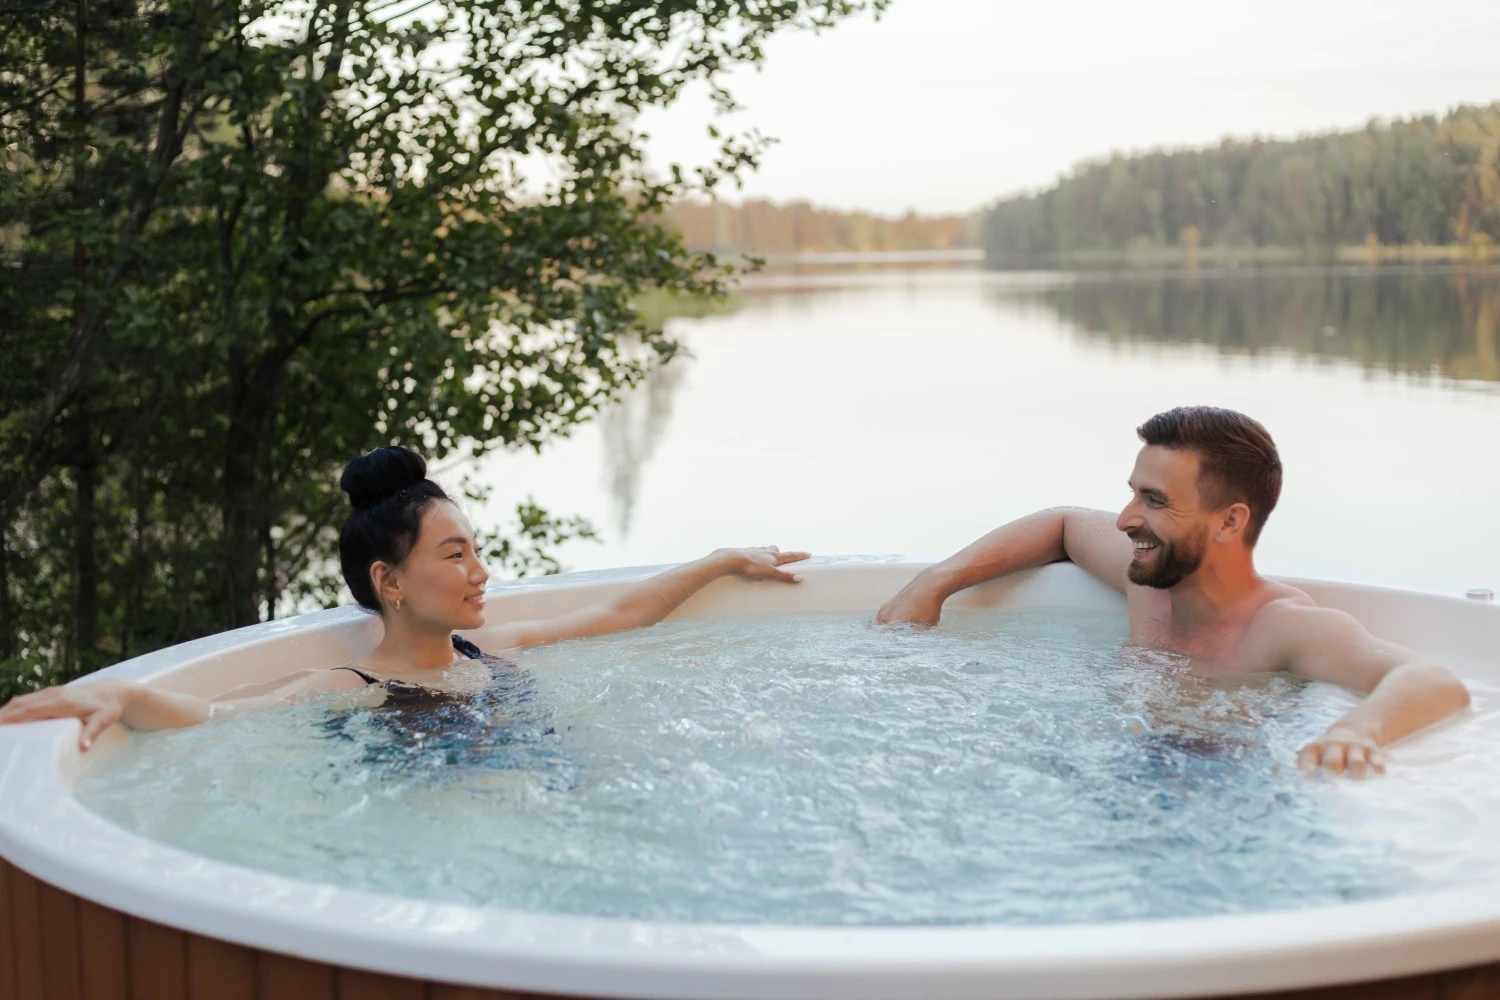 How to Move a Hot Tub and Availing Hot Tub Movers Near Me